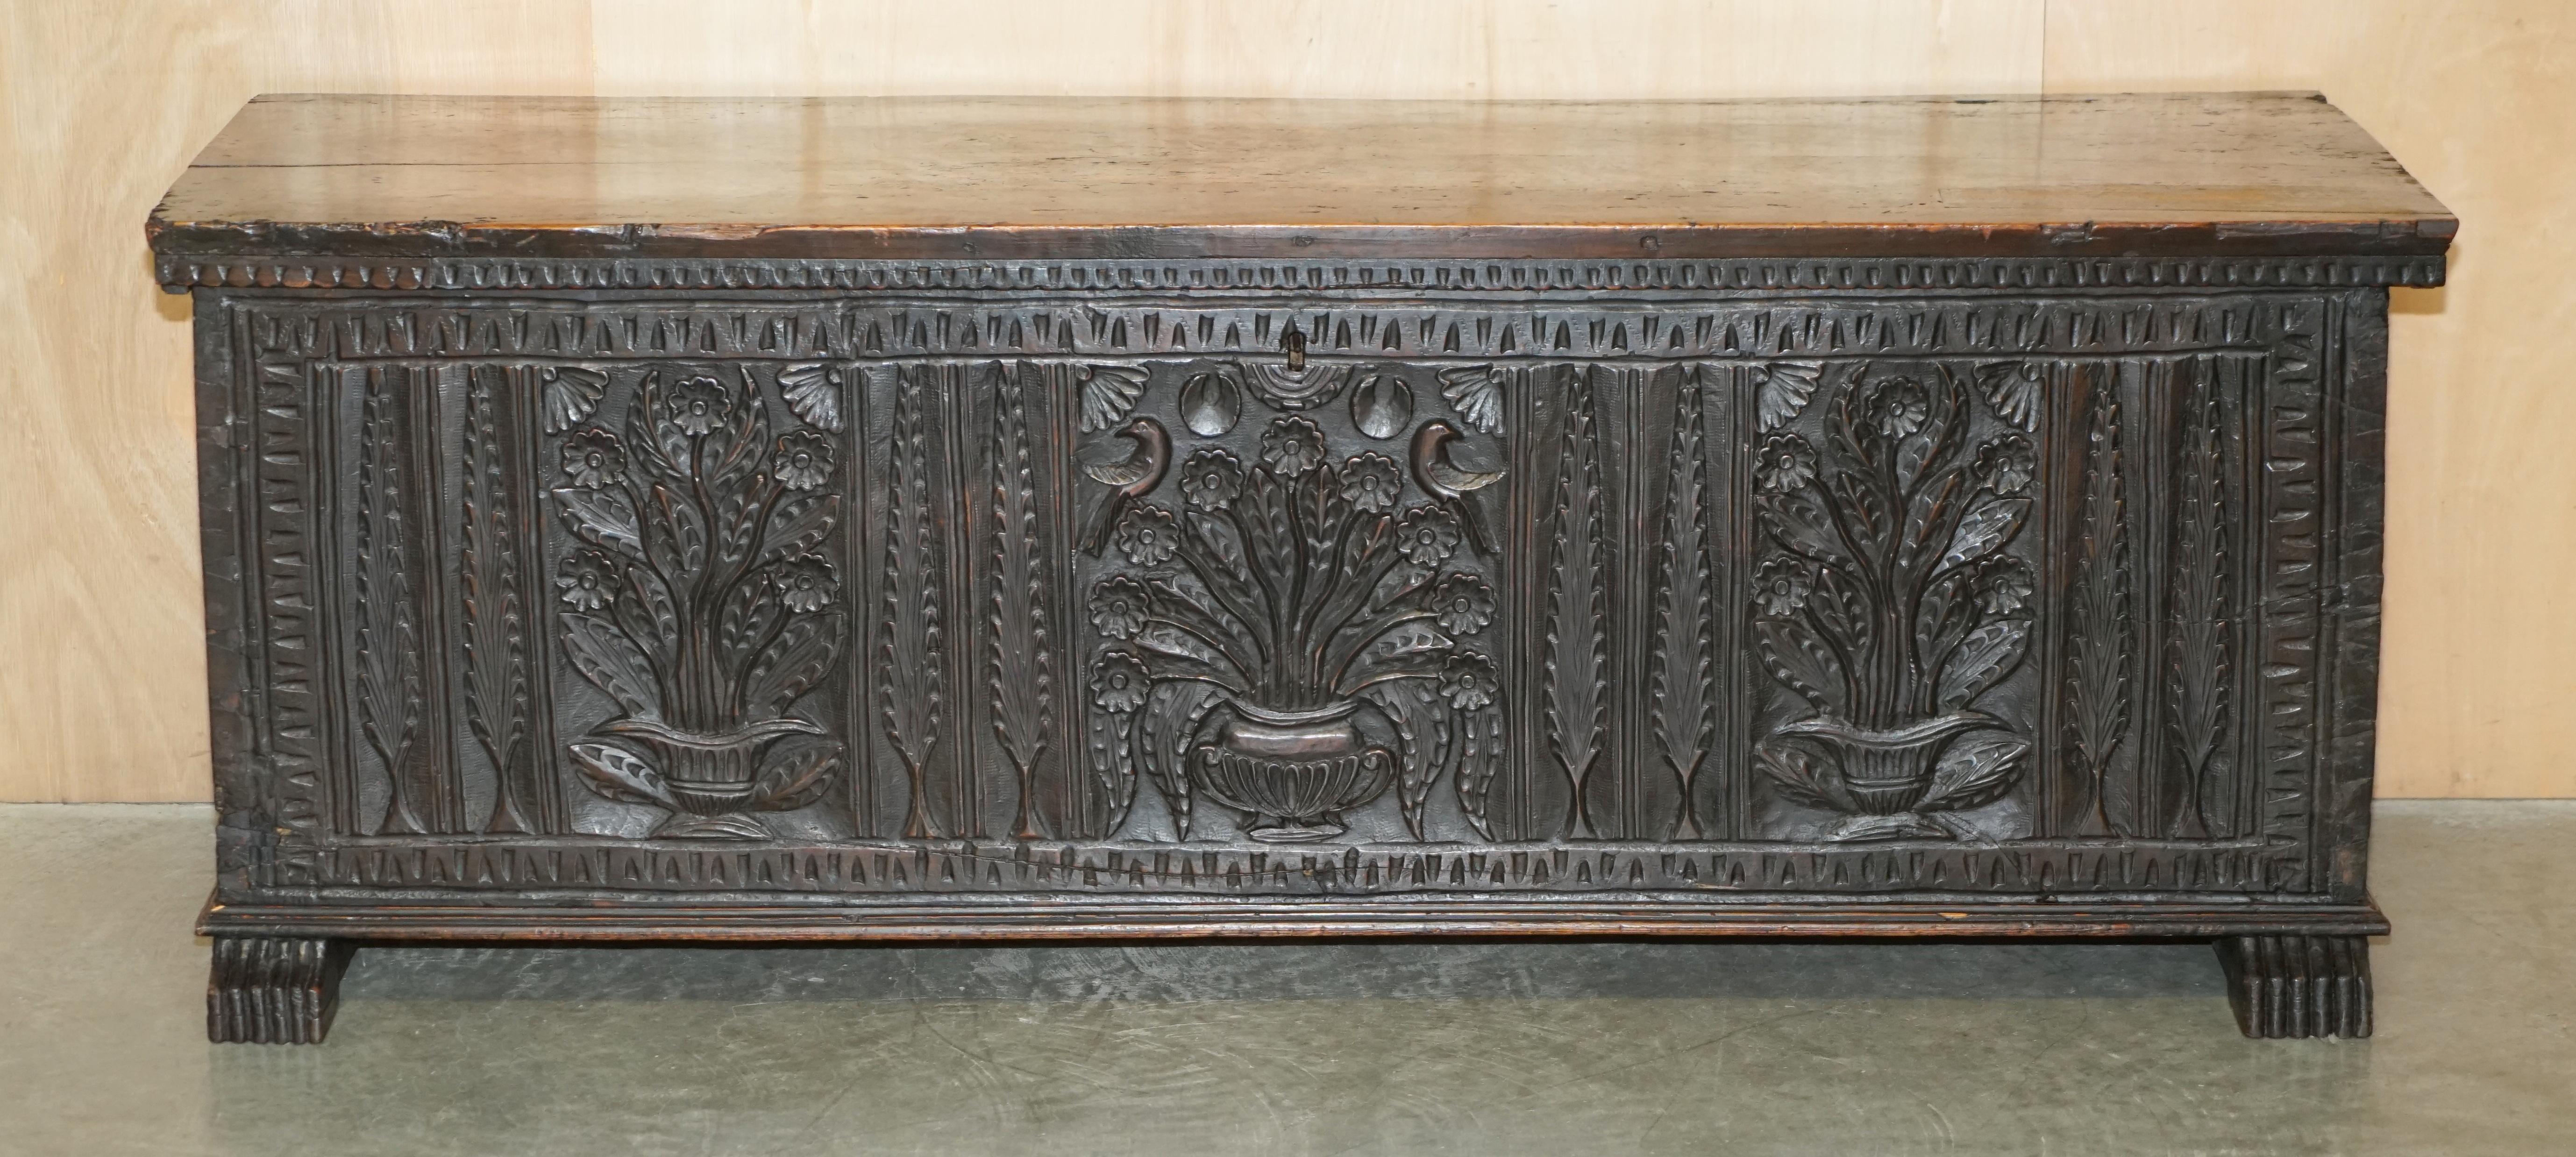 Royal House Antiques

Royal House Antiques is delighted to offer for sale this antique mid 19th century Jacobean revival English oak trunk or chest

Please note the delivery fee listed is just a guide, it covers within the M25 only for the UK and